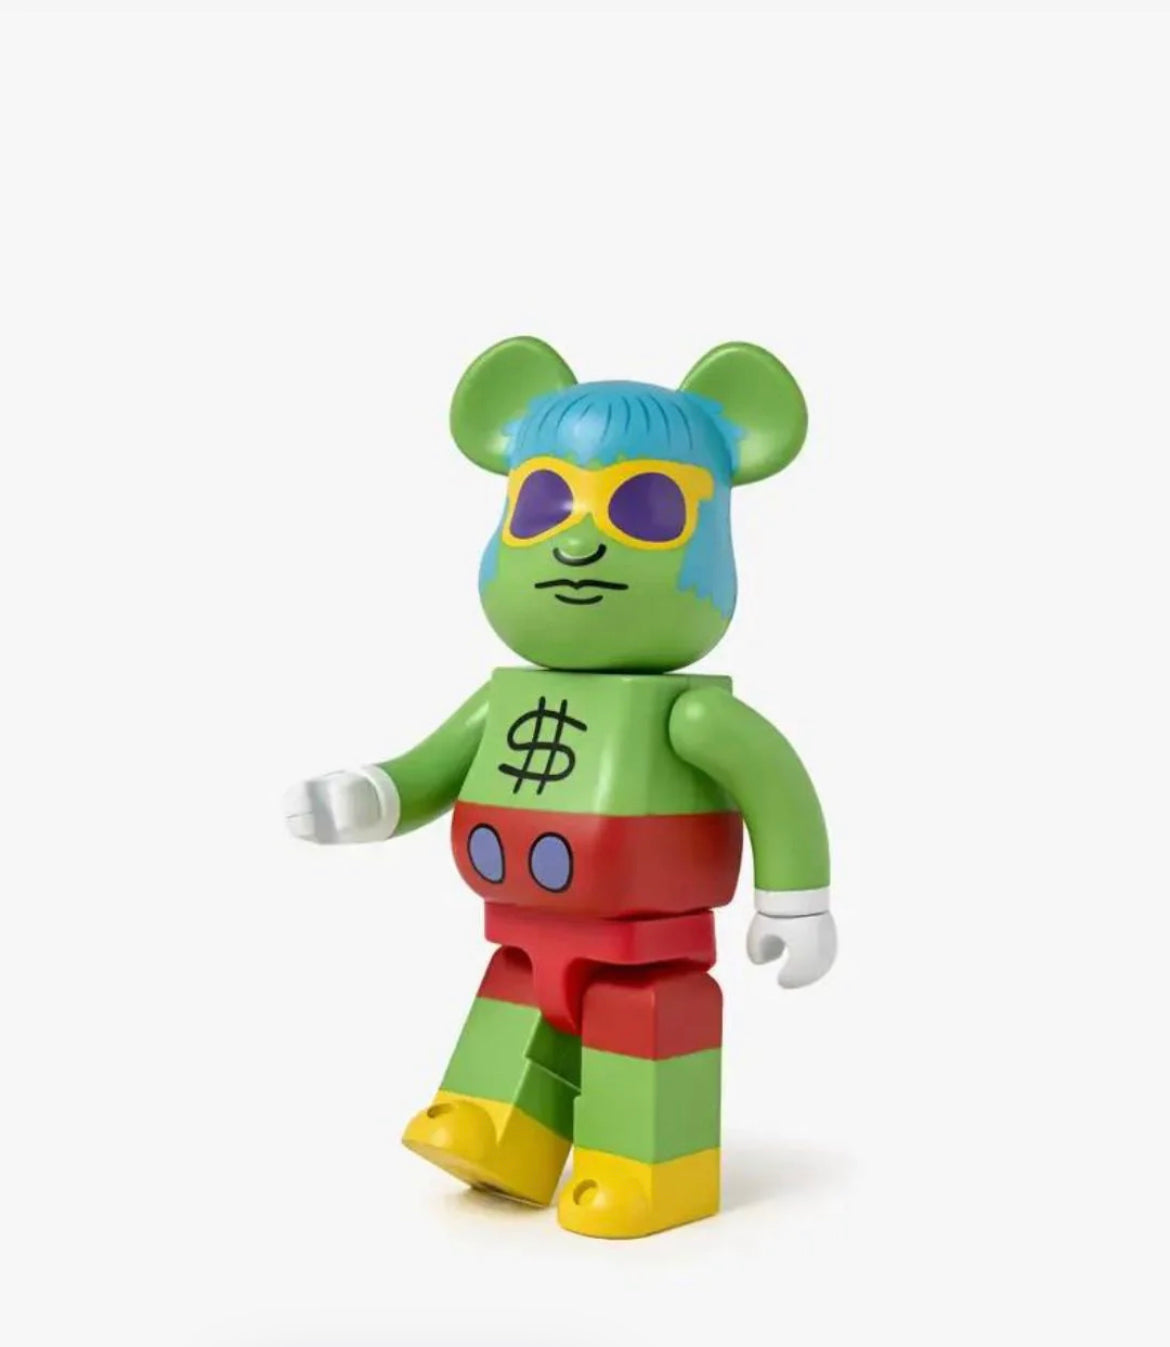 MEDICOM TOY
“Andy Mouse" BE@RBRICK 400% x Keith Haring